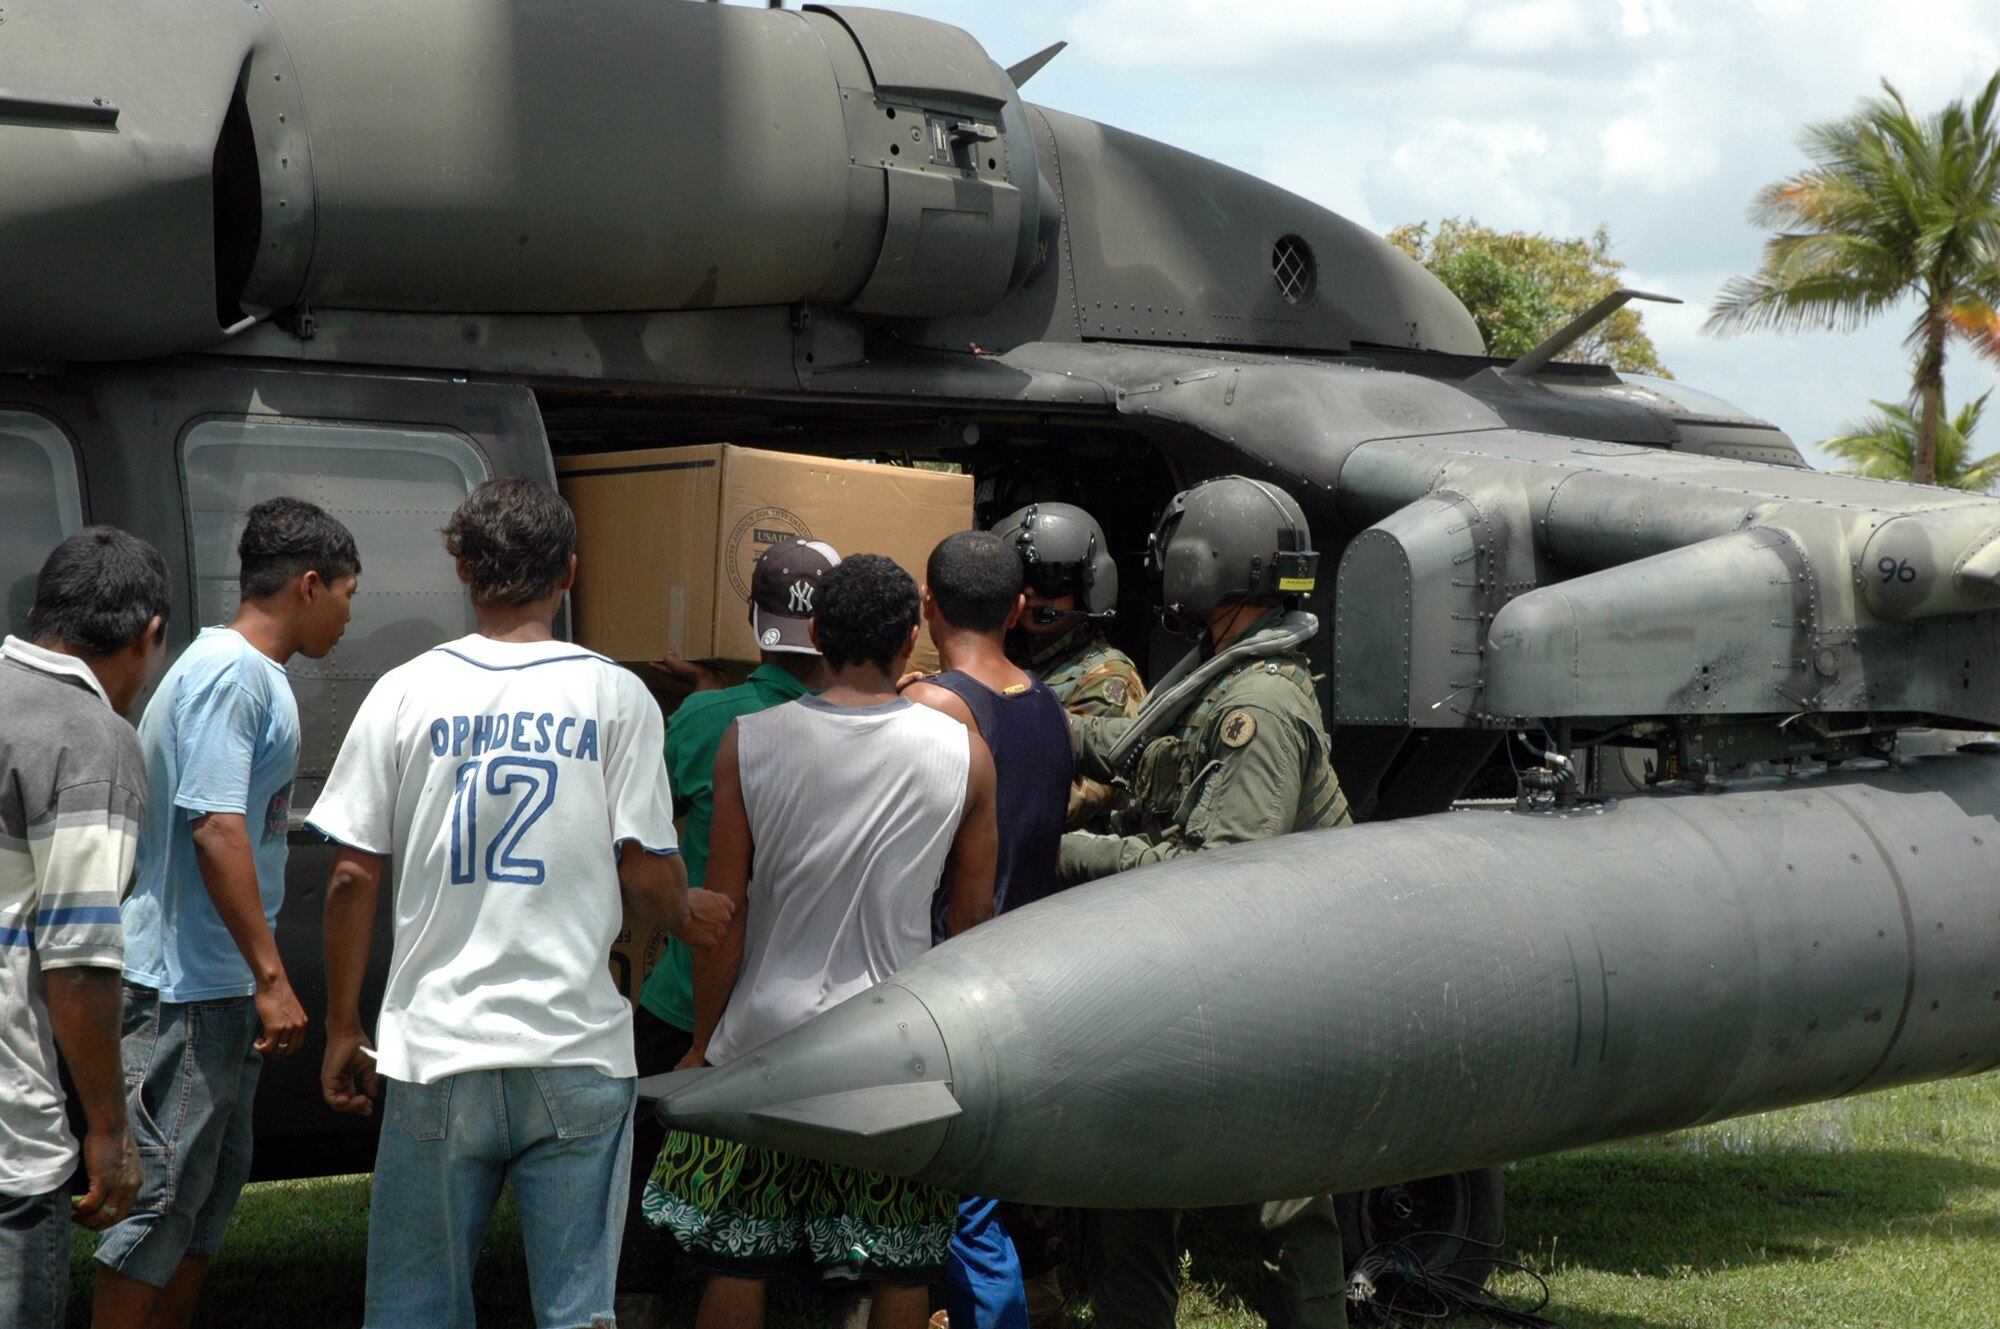 PUERTO CABEZAS, Nicaragua –  Aircrews from Joint Task Force Bravo in Honduras distribute relief supplies Sept. 15 in small communities along the coast near Puerto Cabezas, Nicaragua.  The U.S. State Department and Department of Defense are working together to bring food, water and other needed items to small communities on the Nicaraguan coast that were affected by the hurricane.  (Army photo by Specialist Grant Vaught)